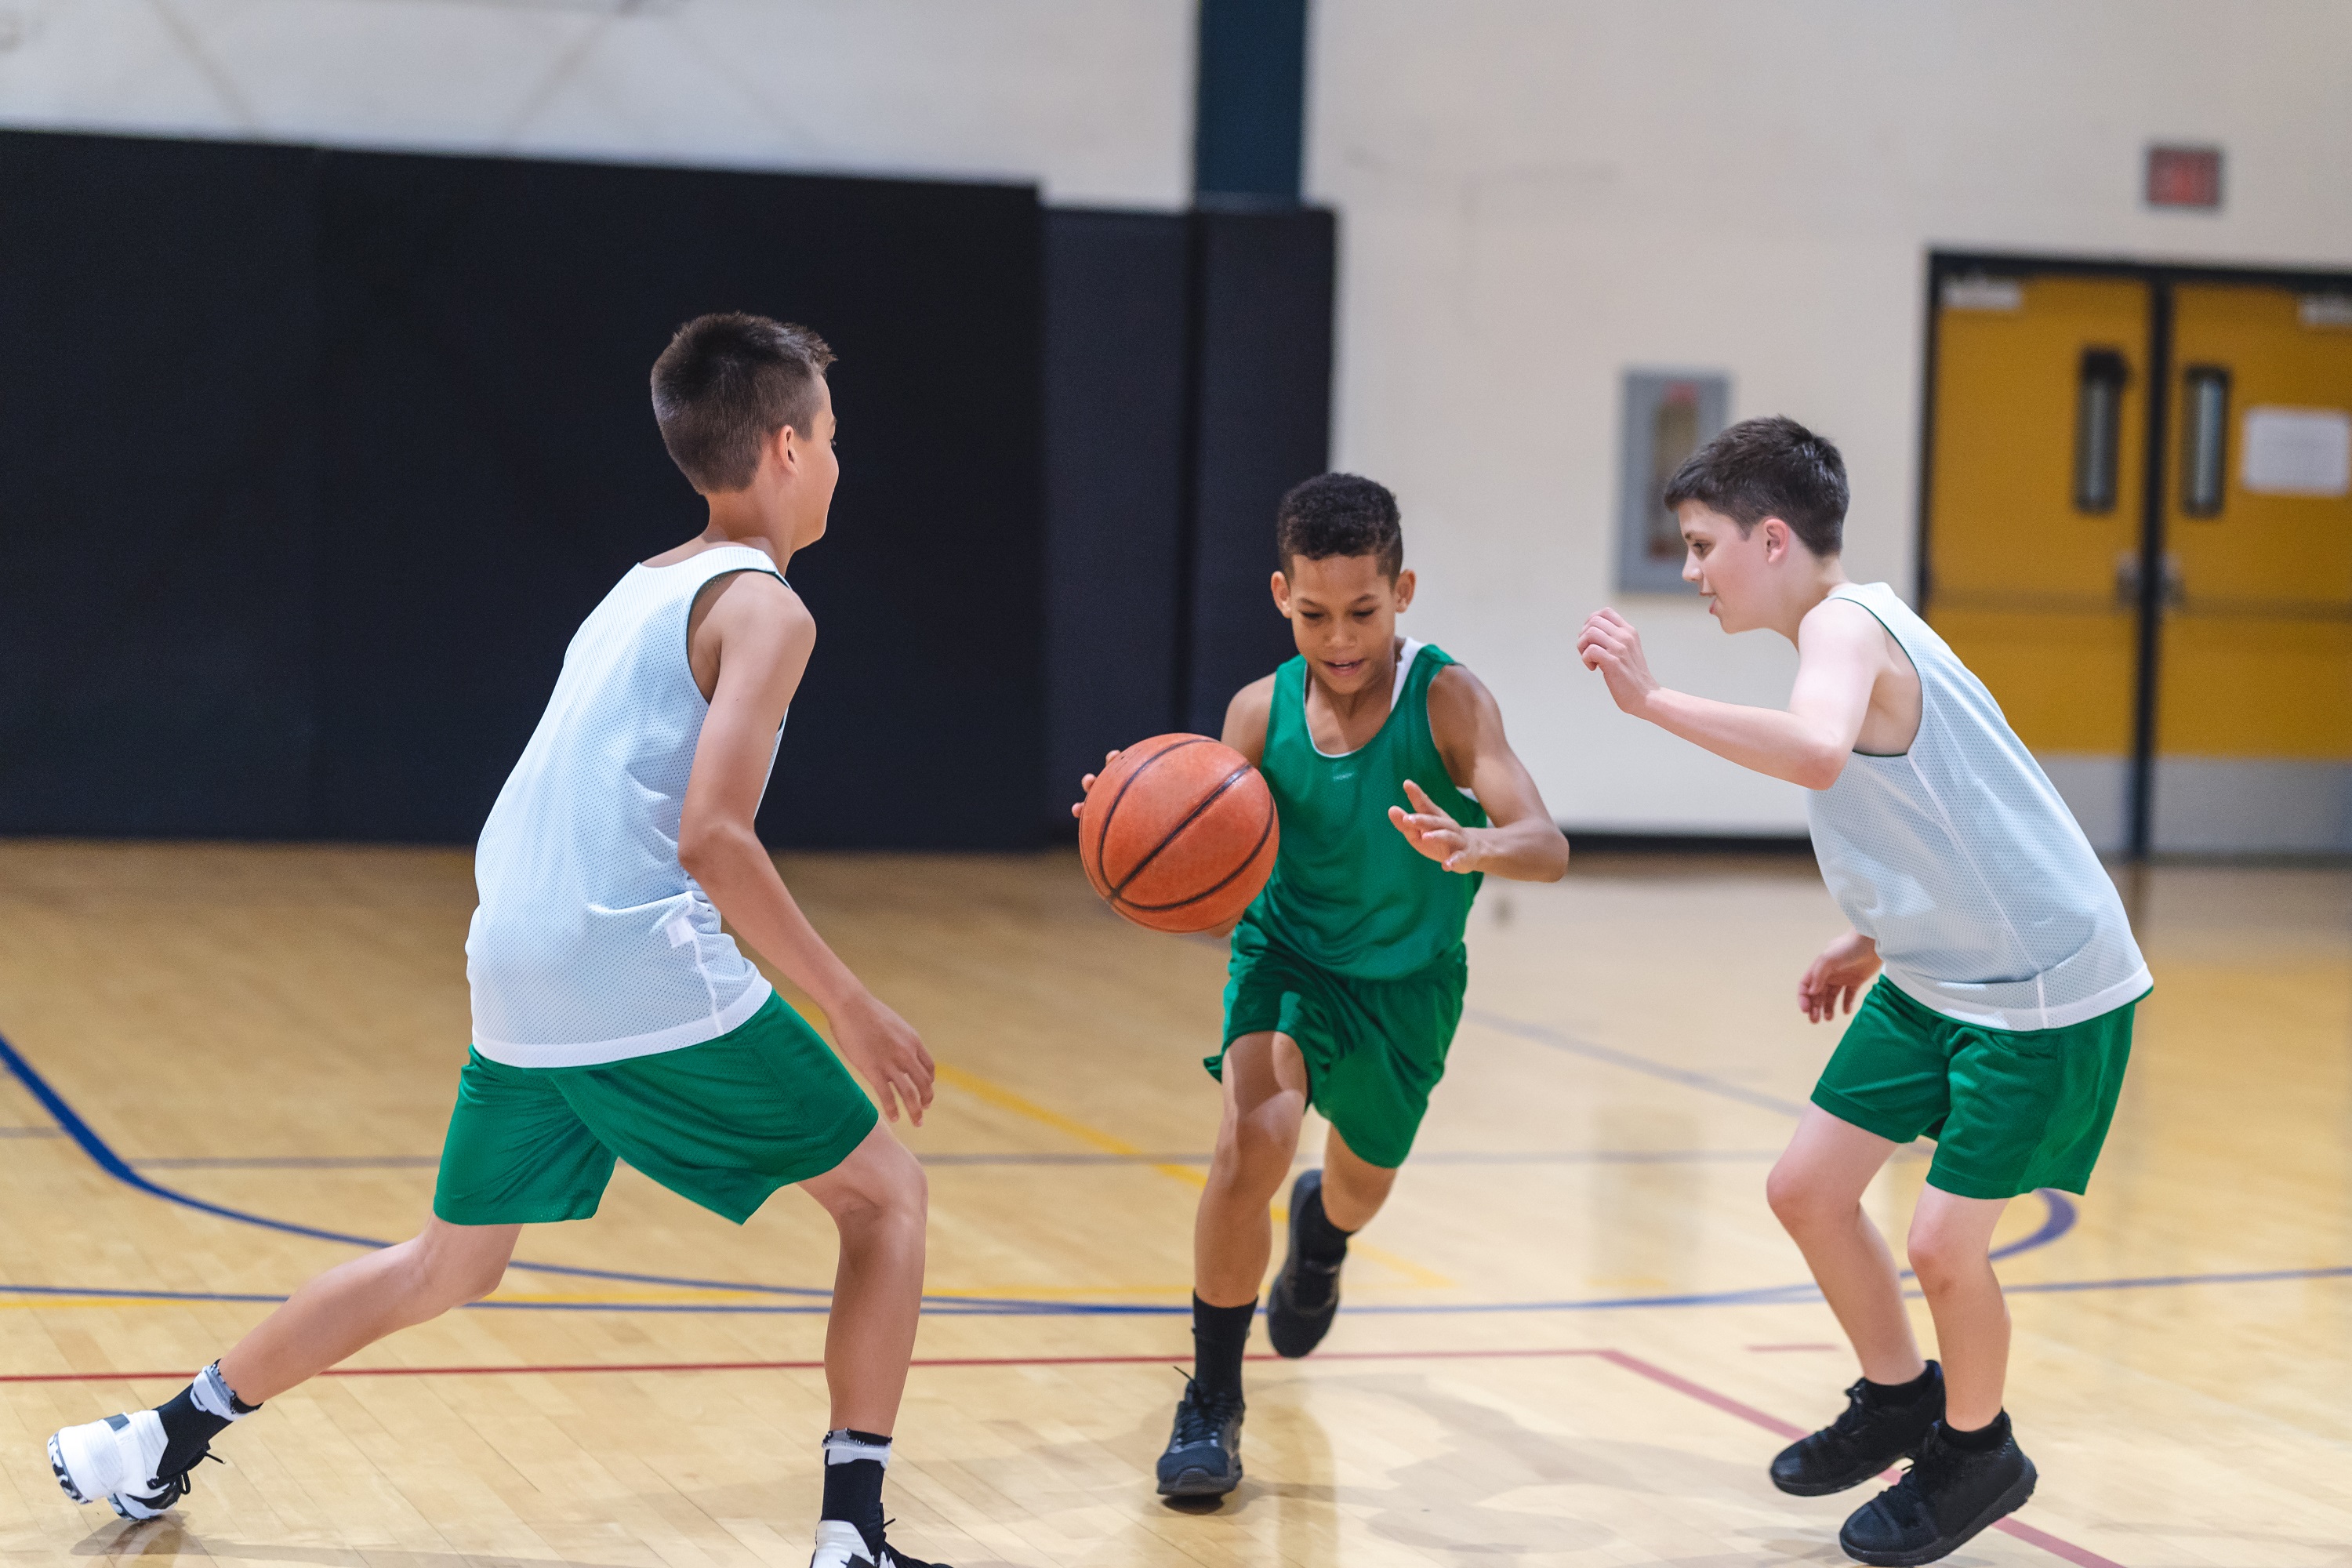 5 Tips for Preventing Sports Injuries in Kids